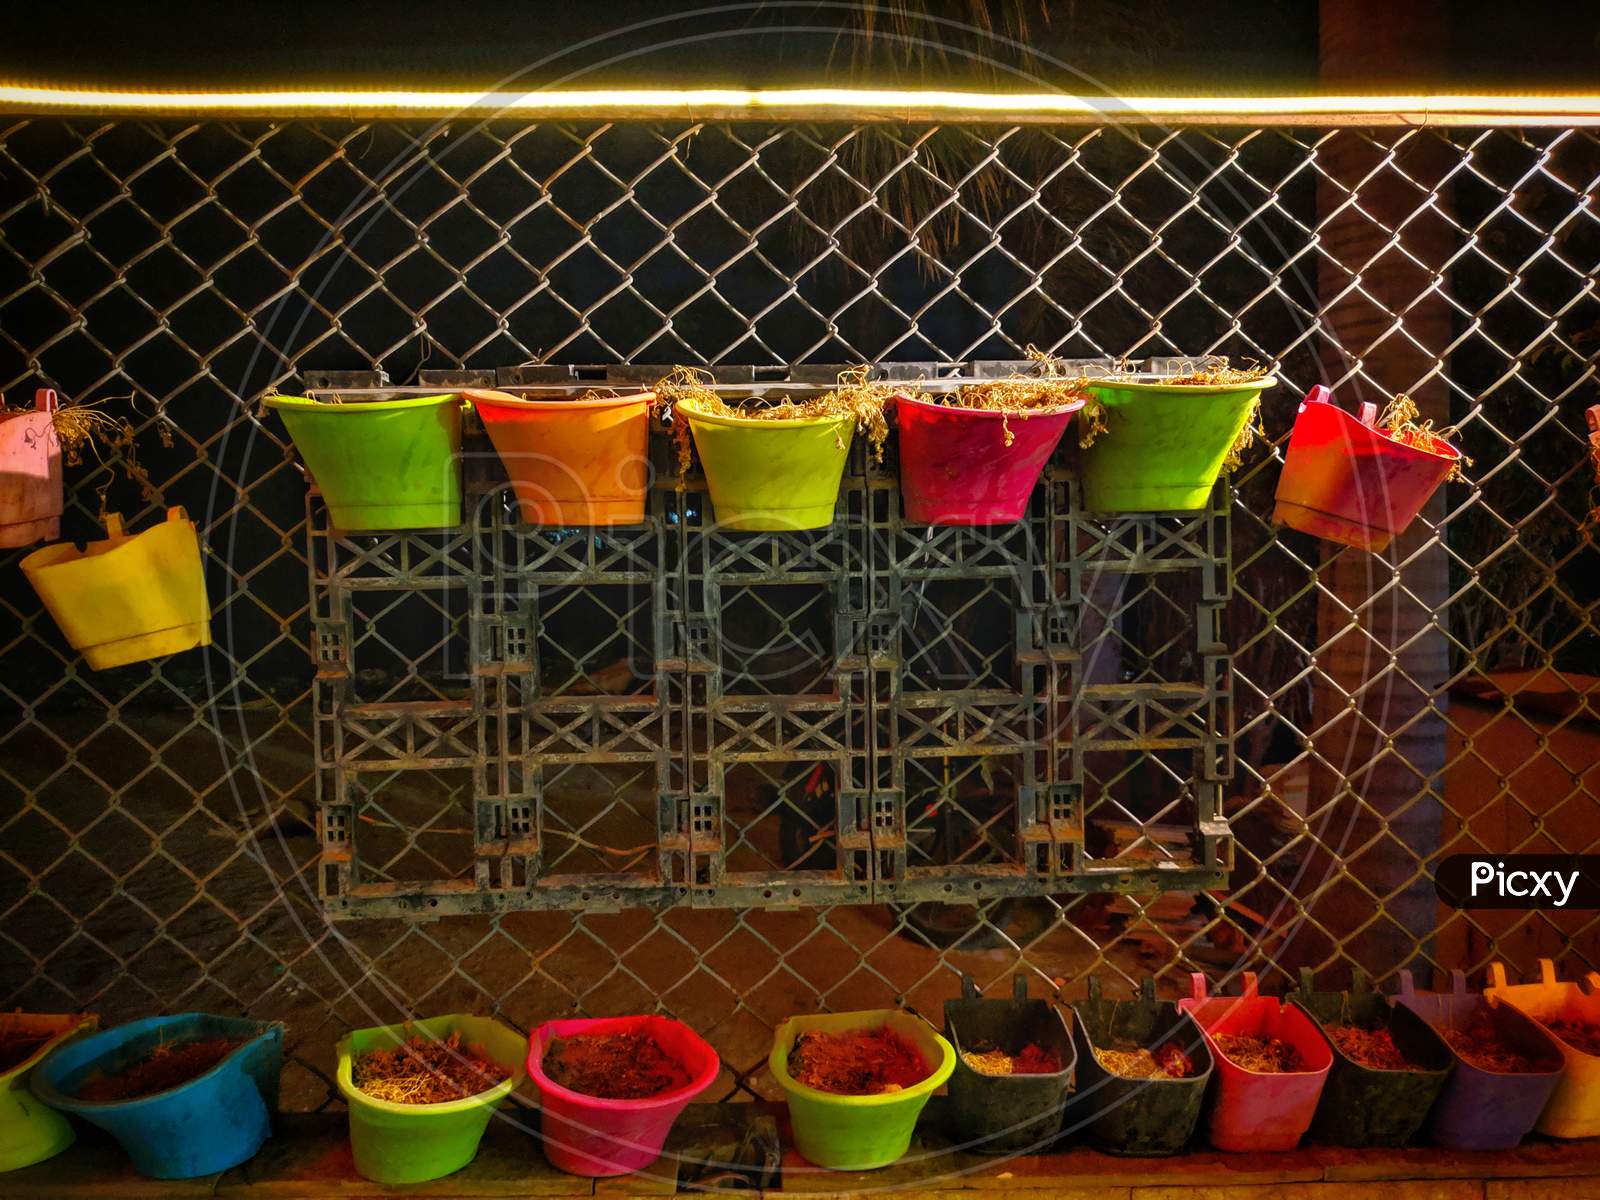 Arrangement Of Colorful Hanging Wicker Flowerpots With Green House Plants Against Decorative Black Grid,India.